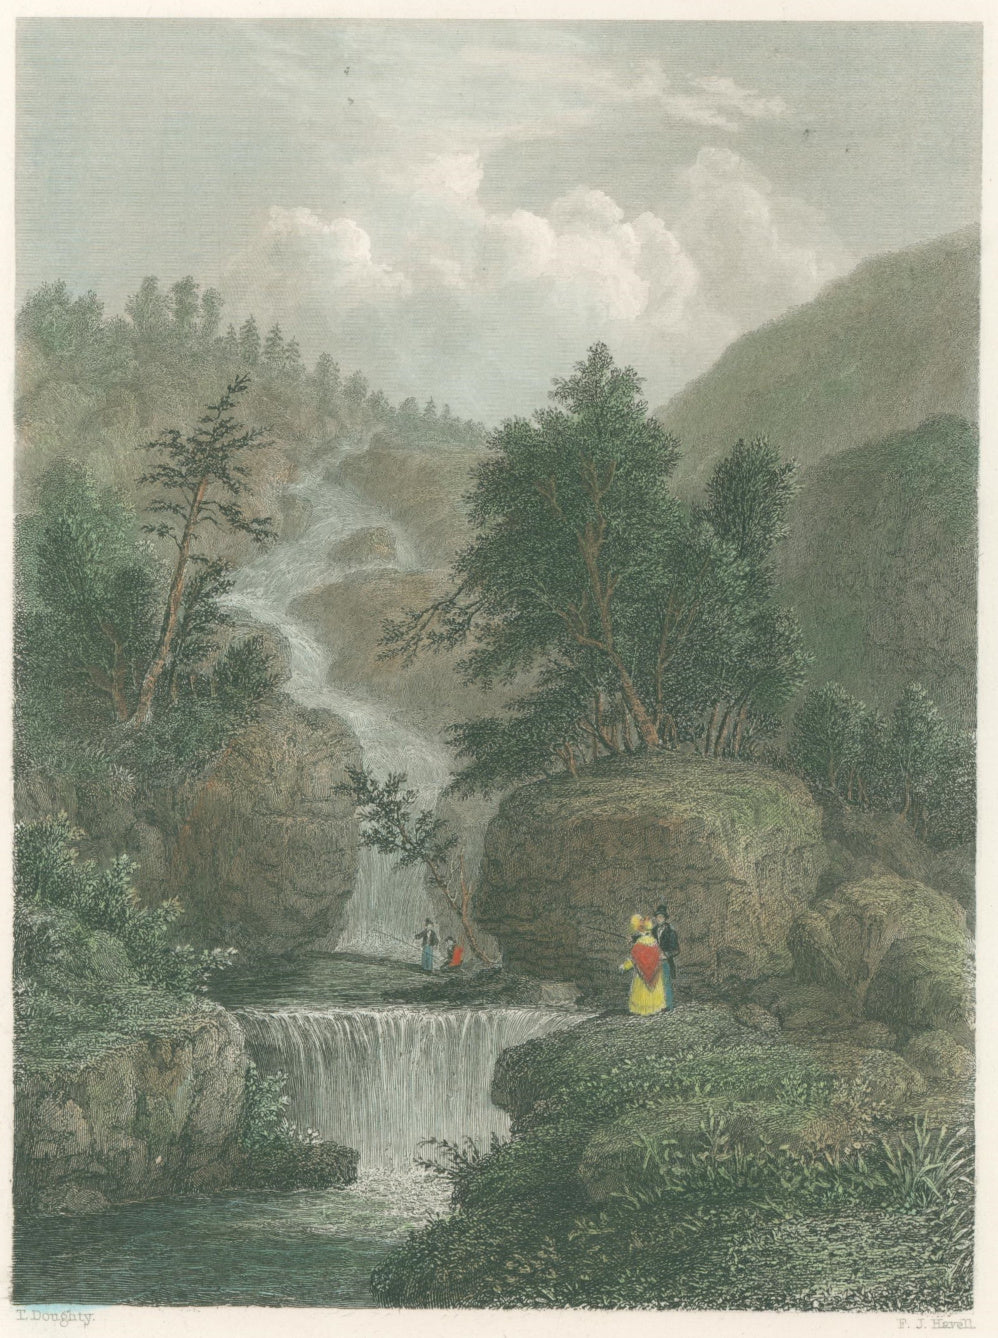 Bartlett, W.H. “The Silver Cascade. In the Notch of the White Mountains